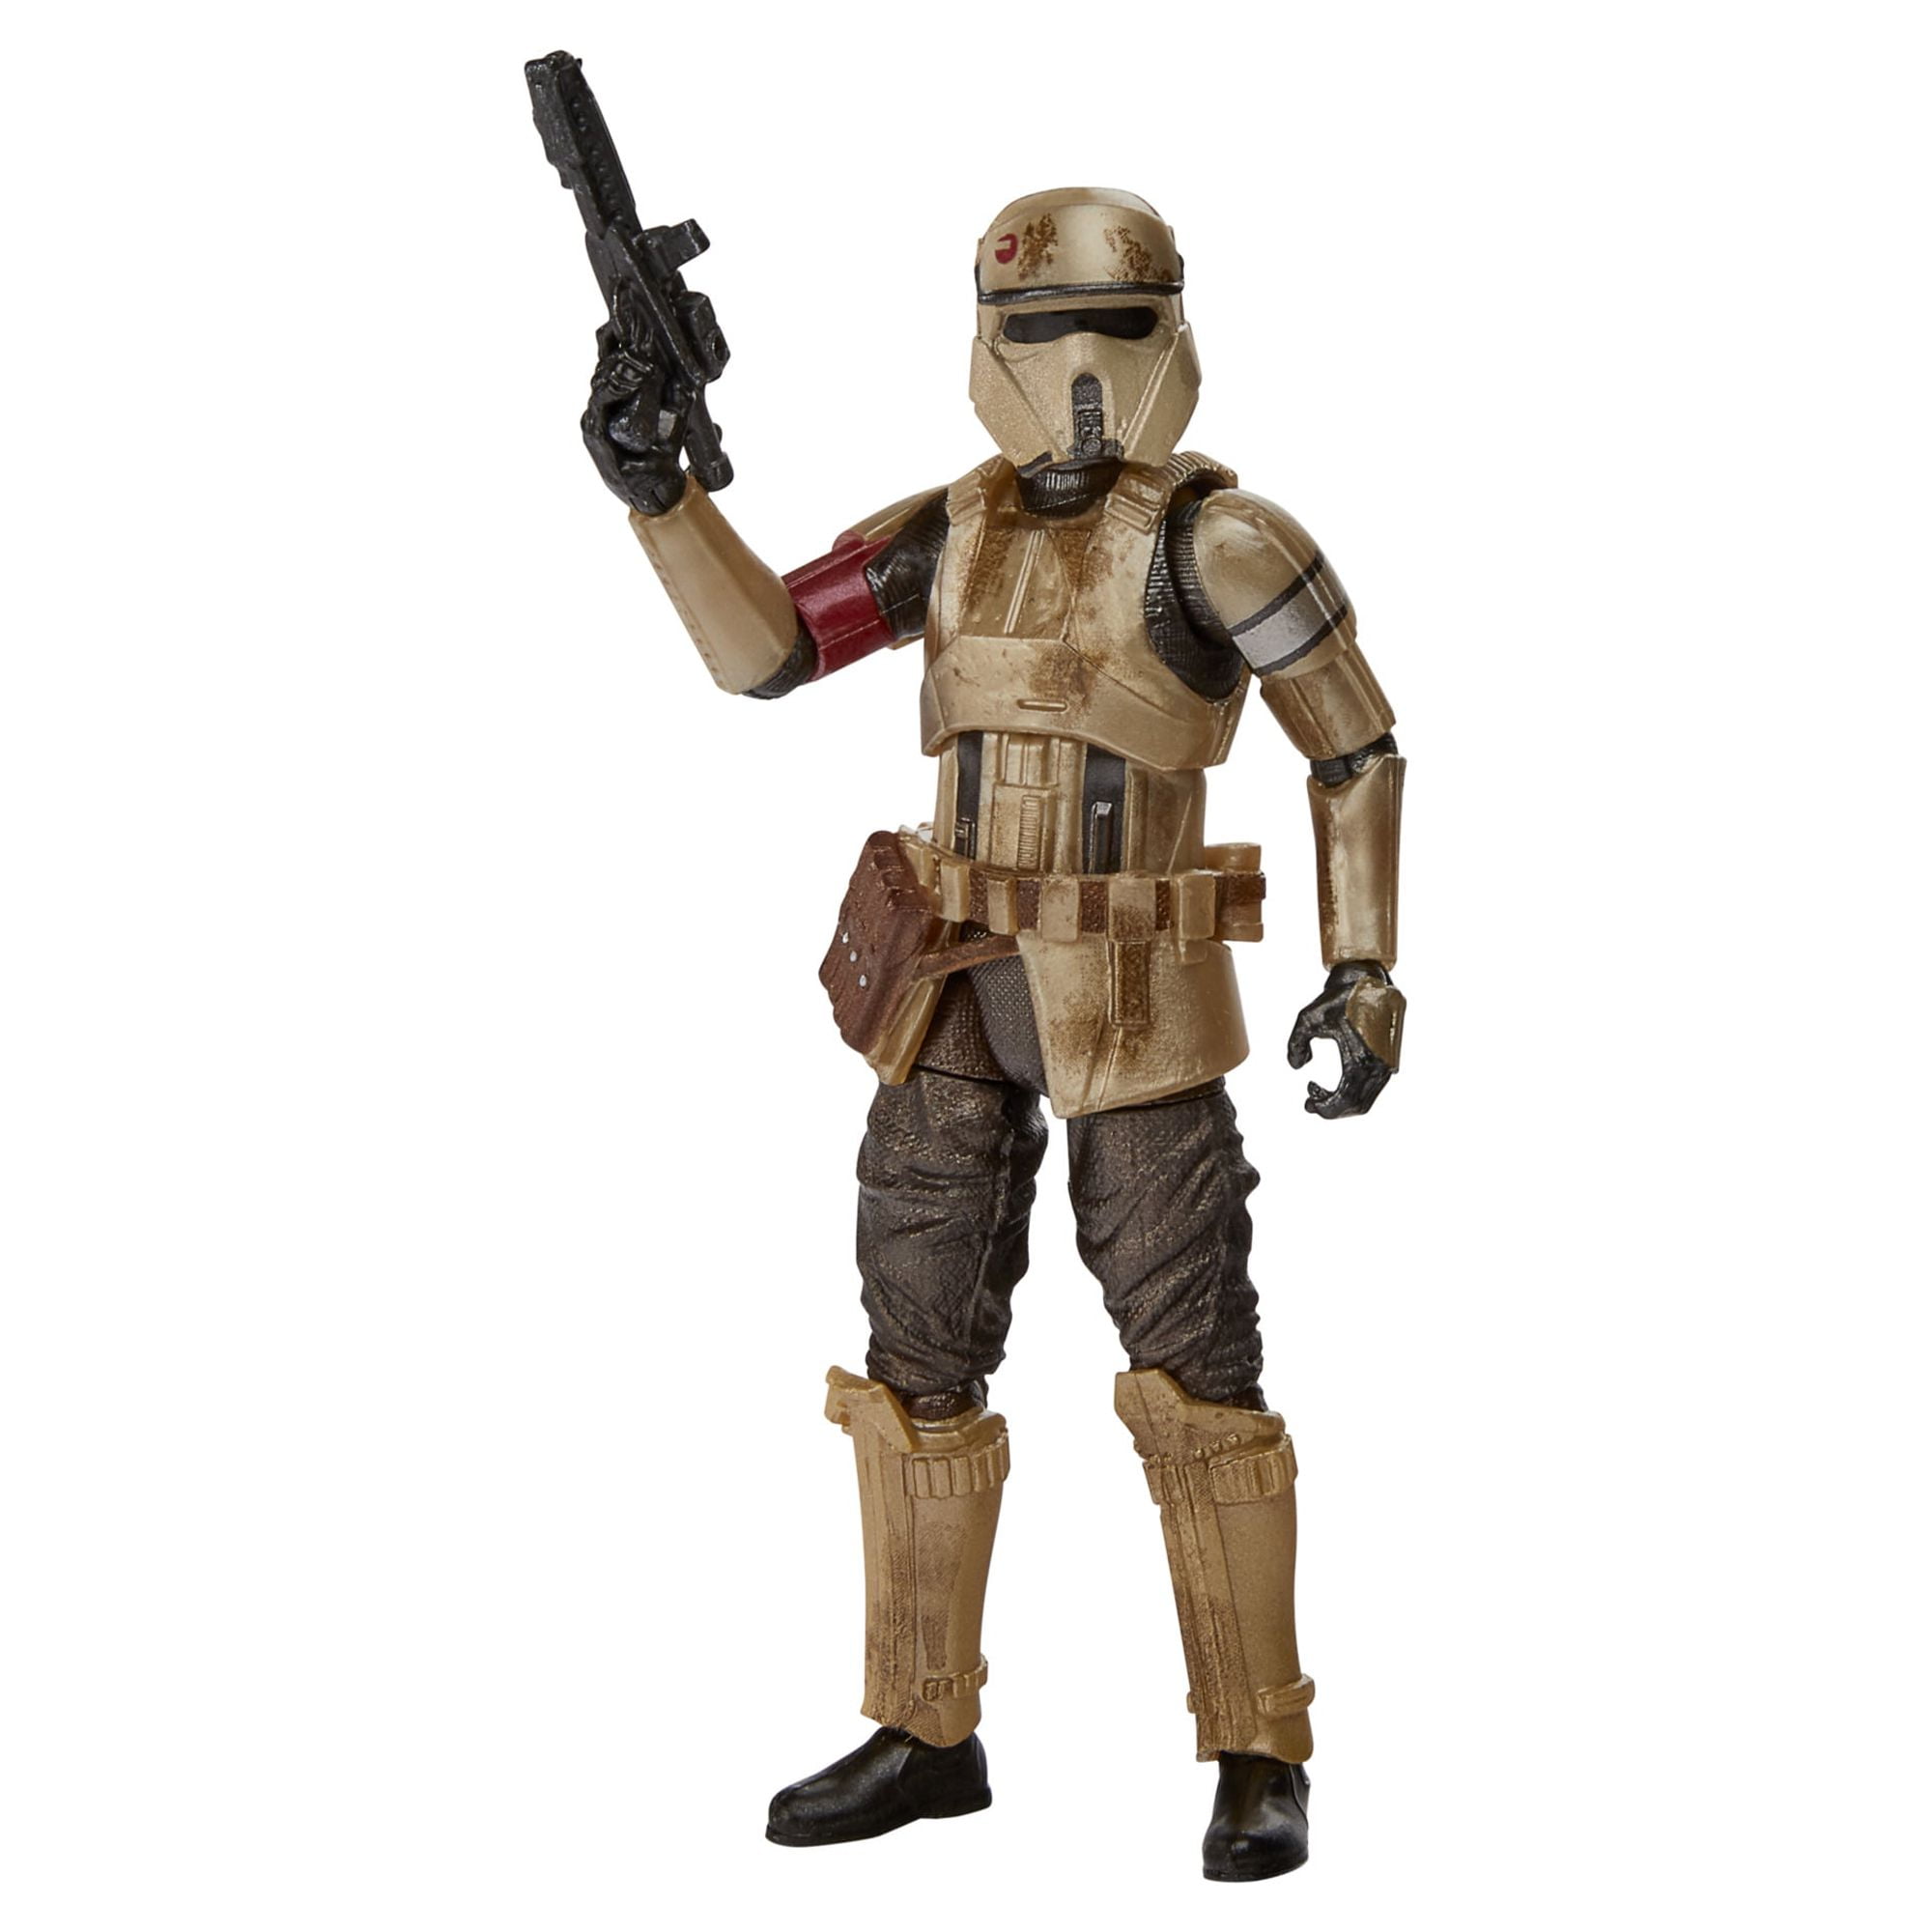 3.75” Star Wars: The Mandalorian The Vintage Collection Shoretrooper Action Figure $5.49 + Free Shipping w/ Walmart+ or on $35+